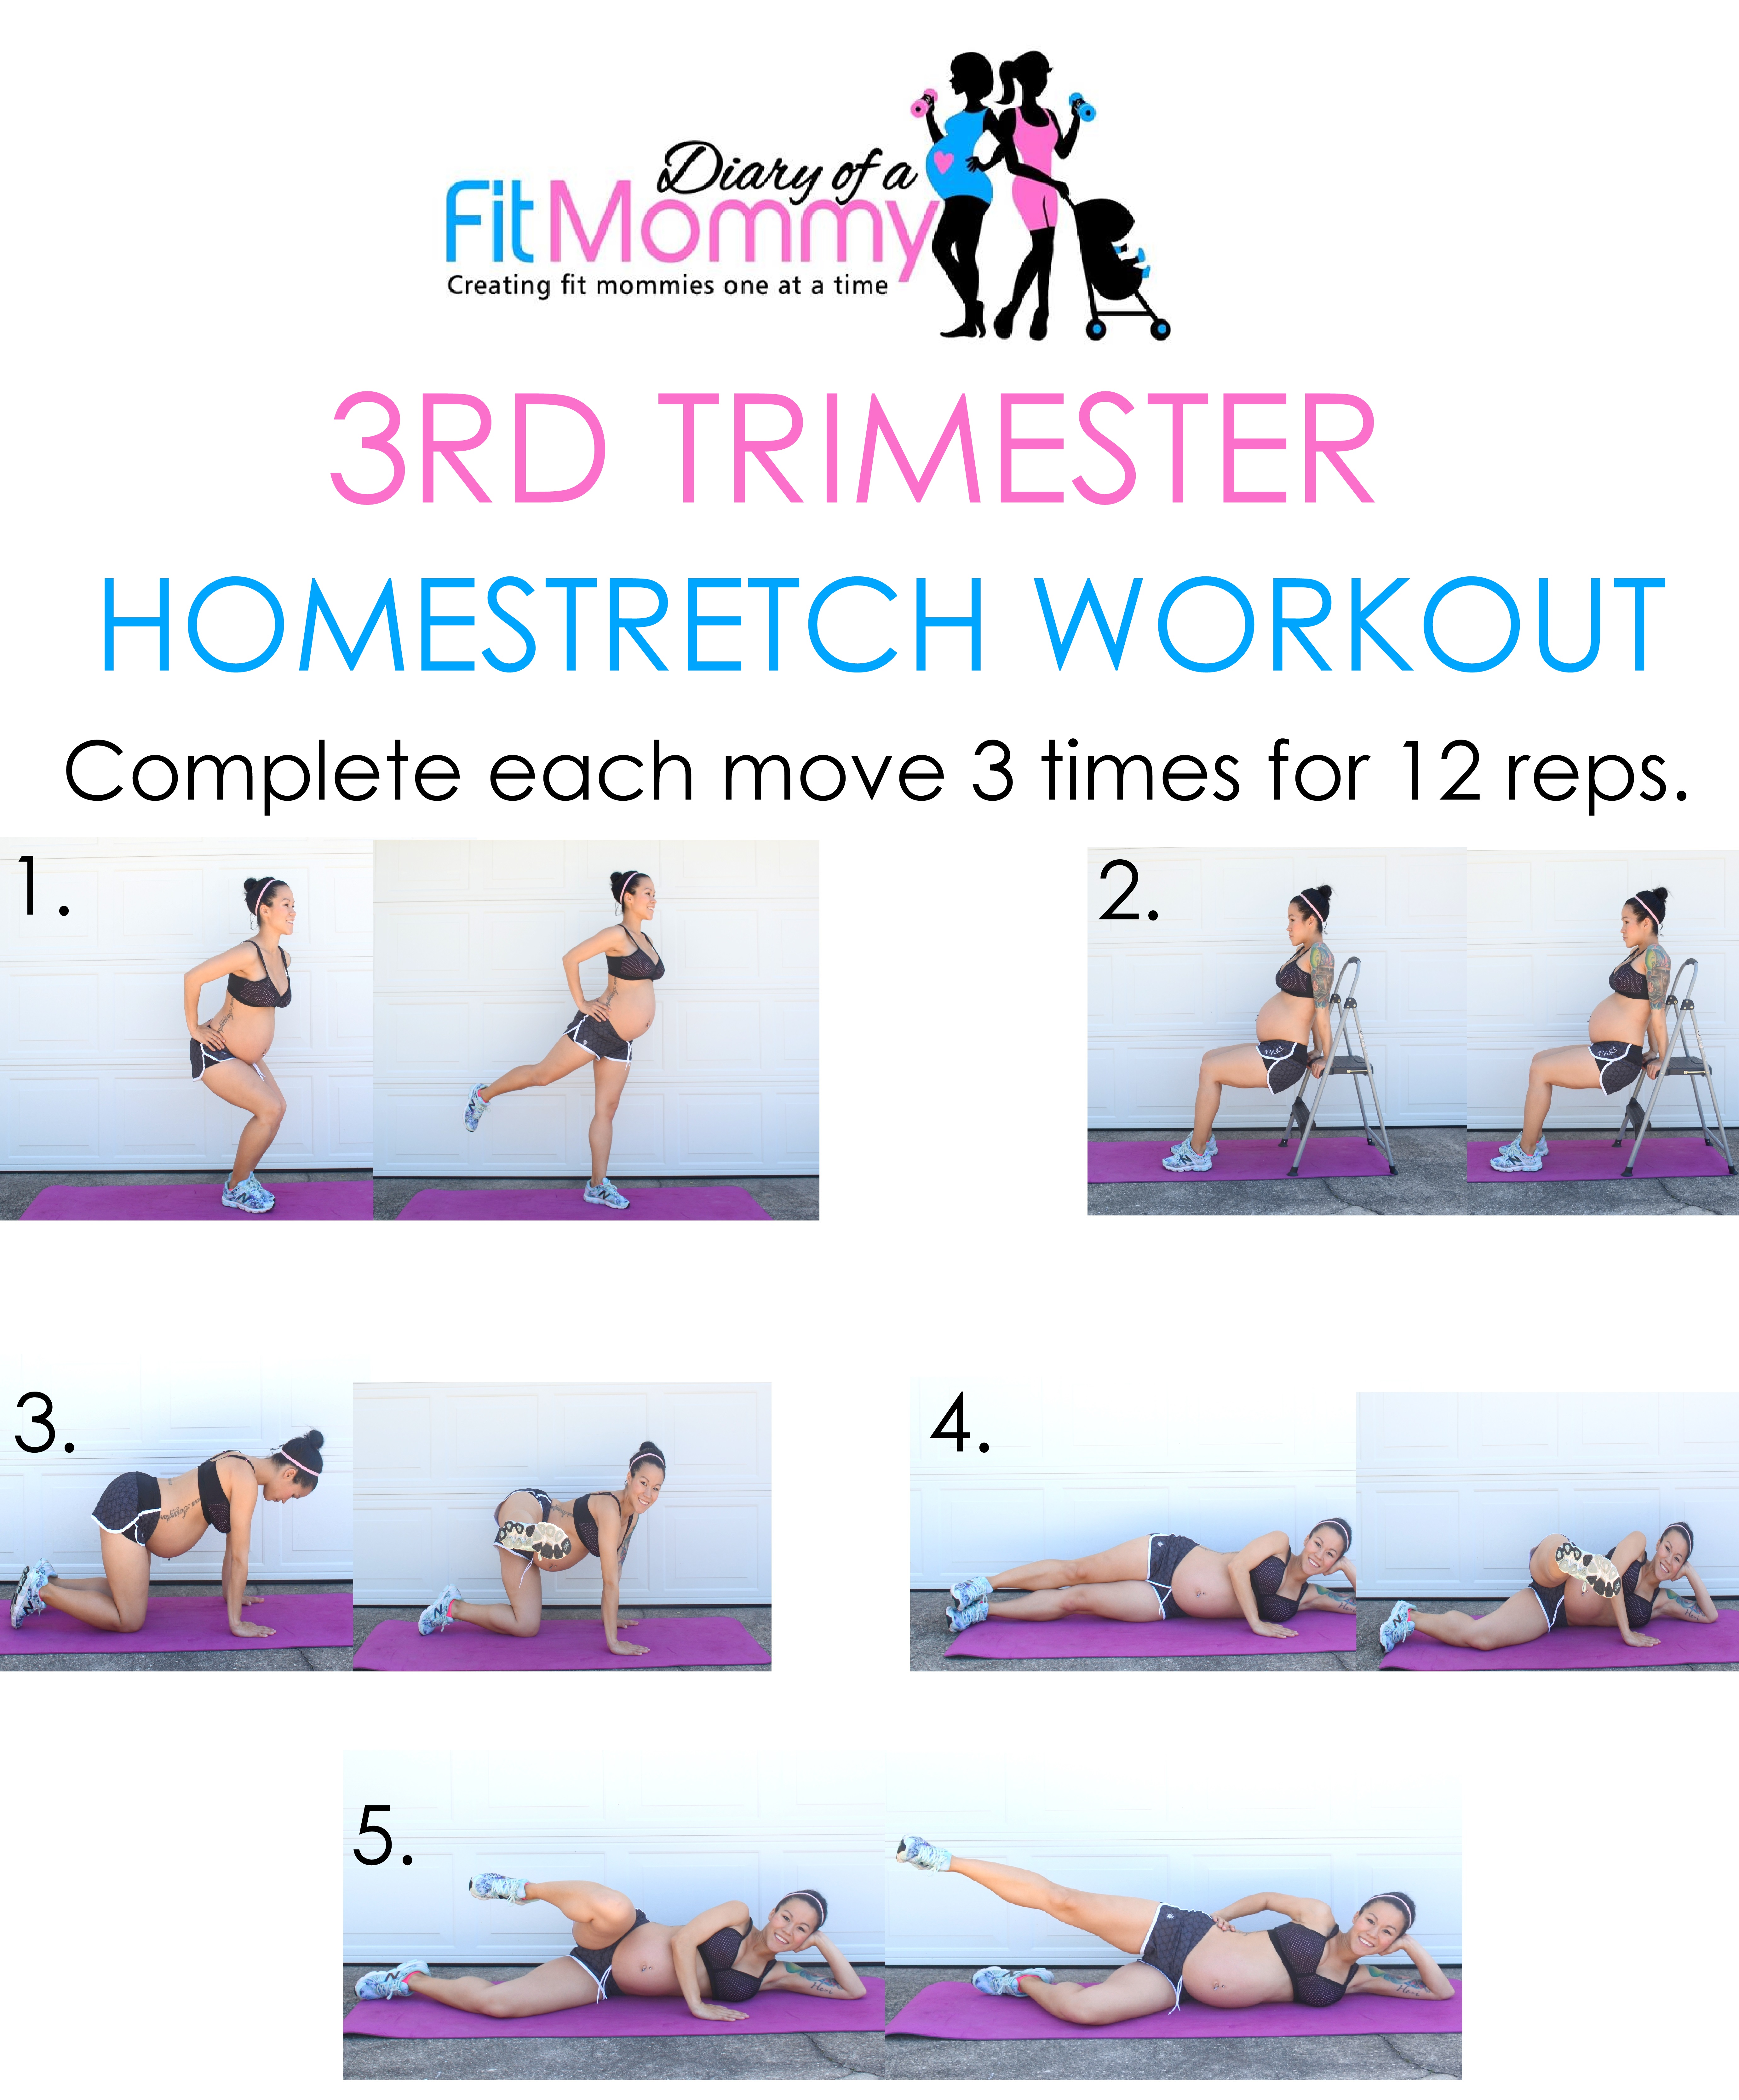 3rd Trimester Full Body Home Workout Diary of a Fit Mommy